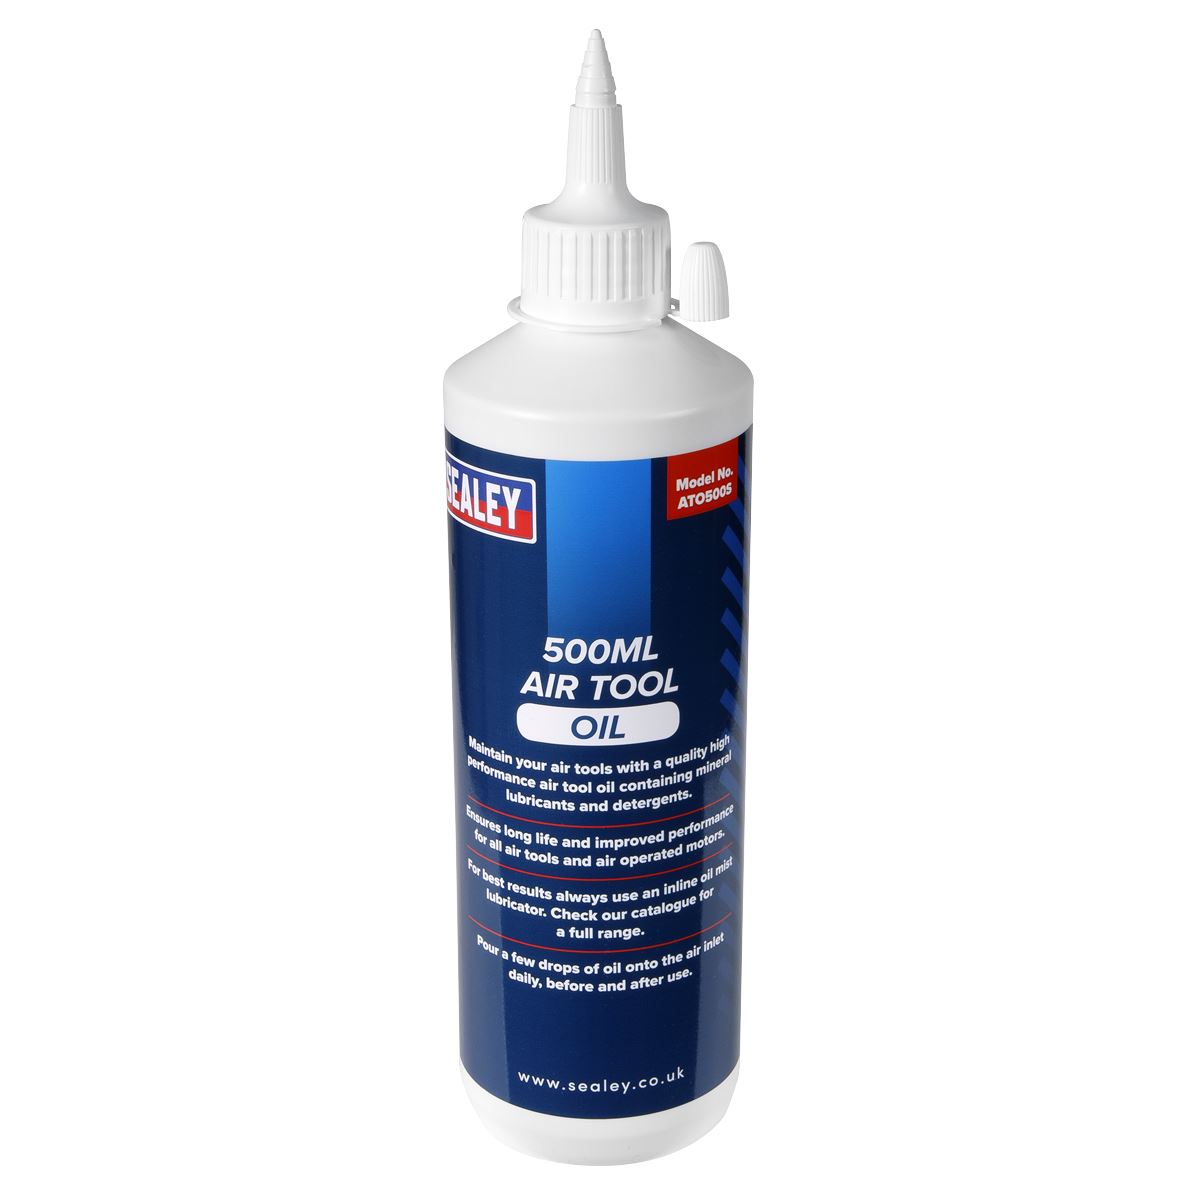 Sealey 500ml High Performance Air Tool Oil Lubricant Airline Tools Maintain